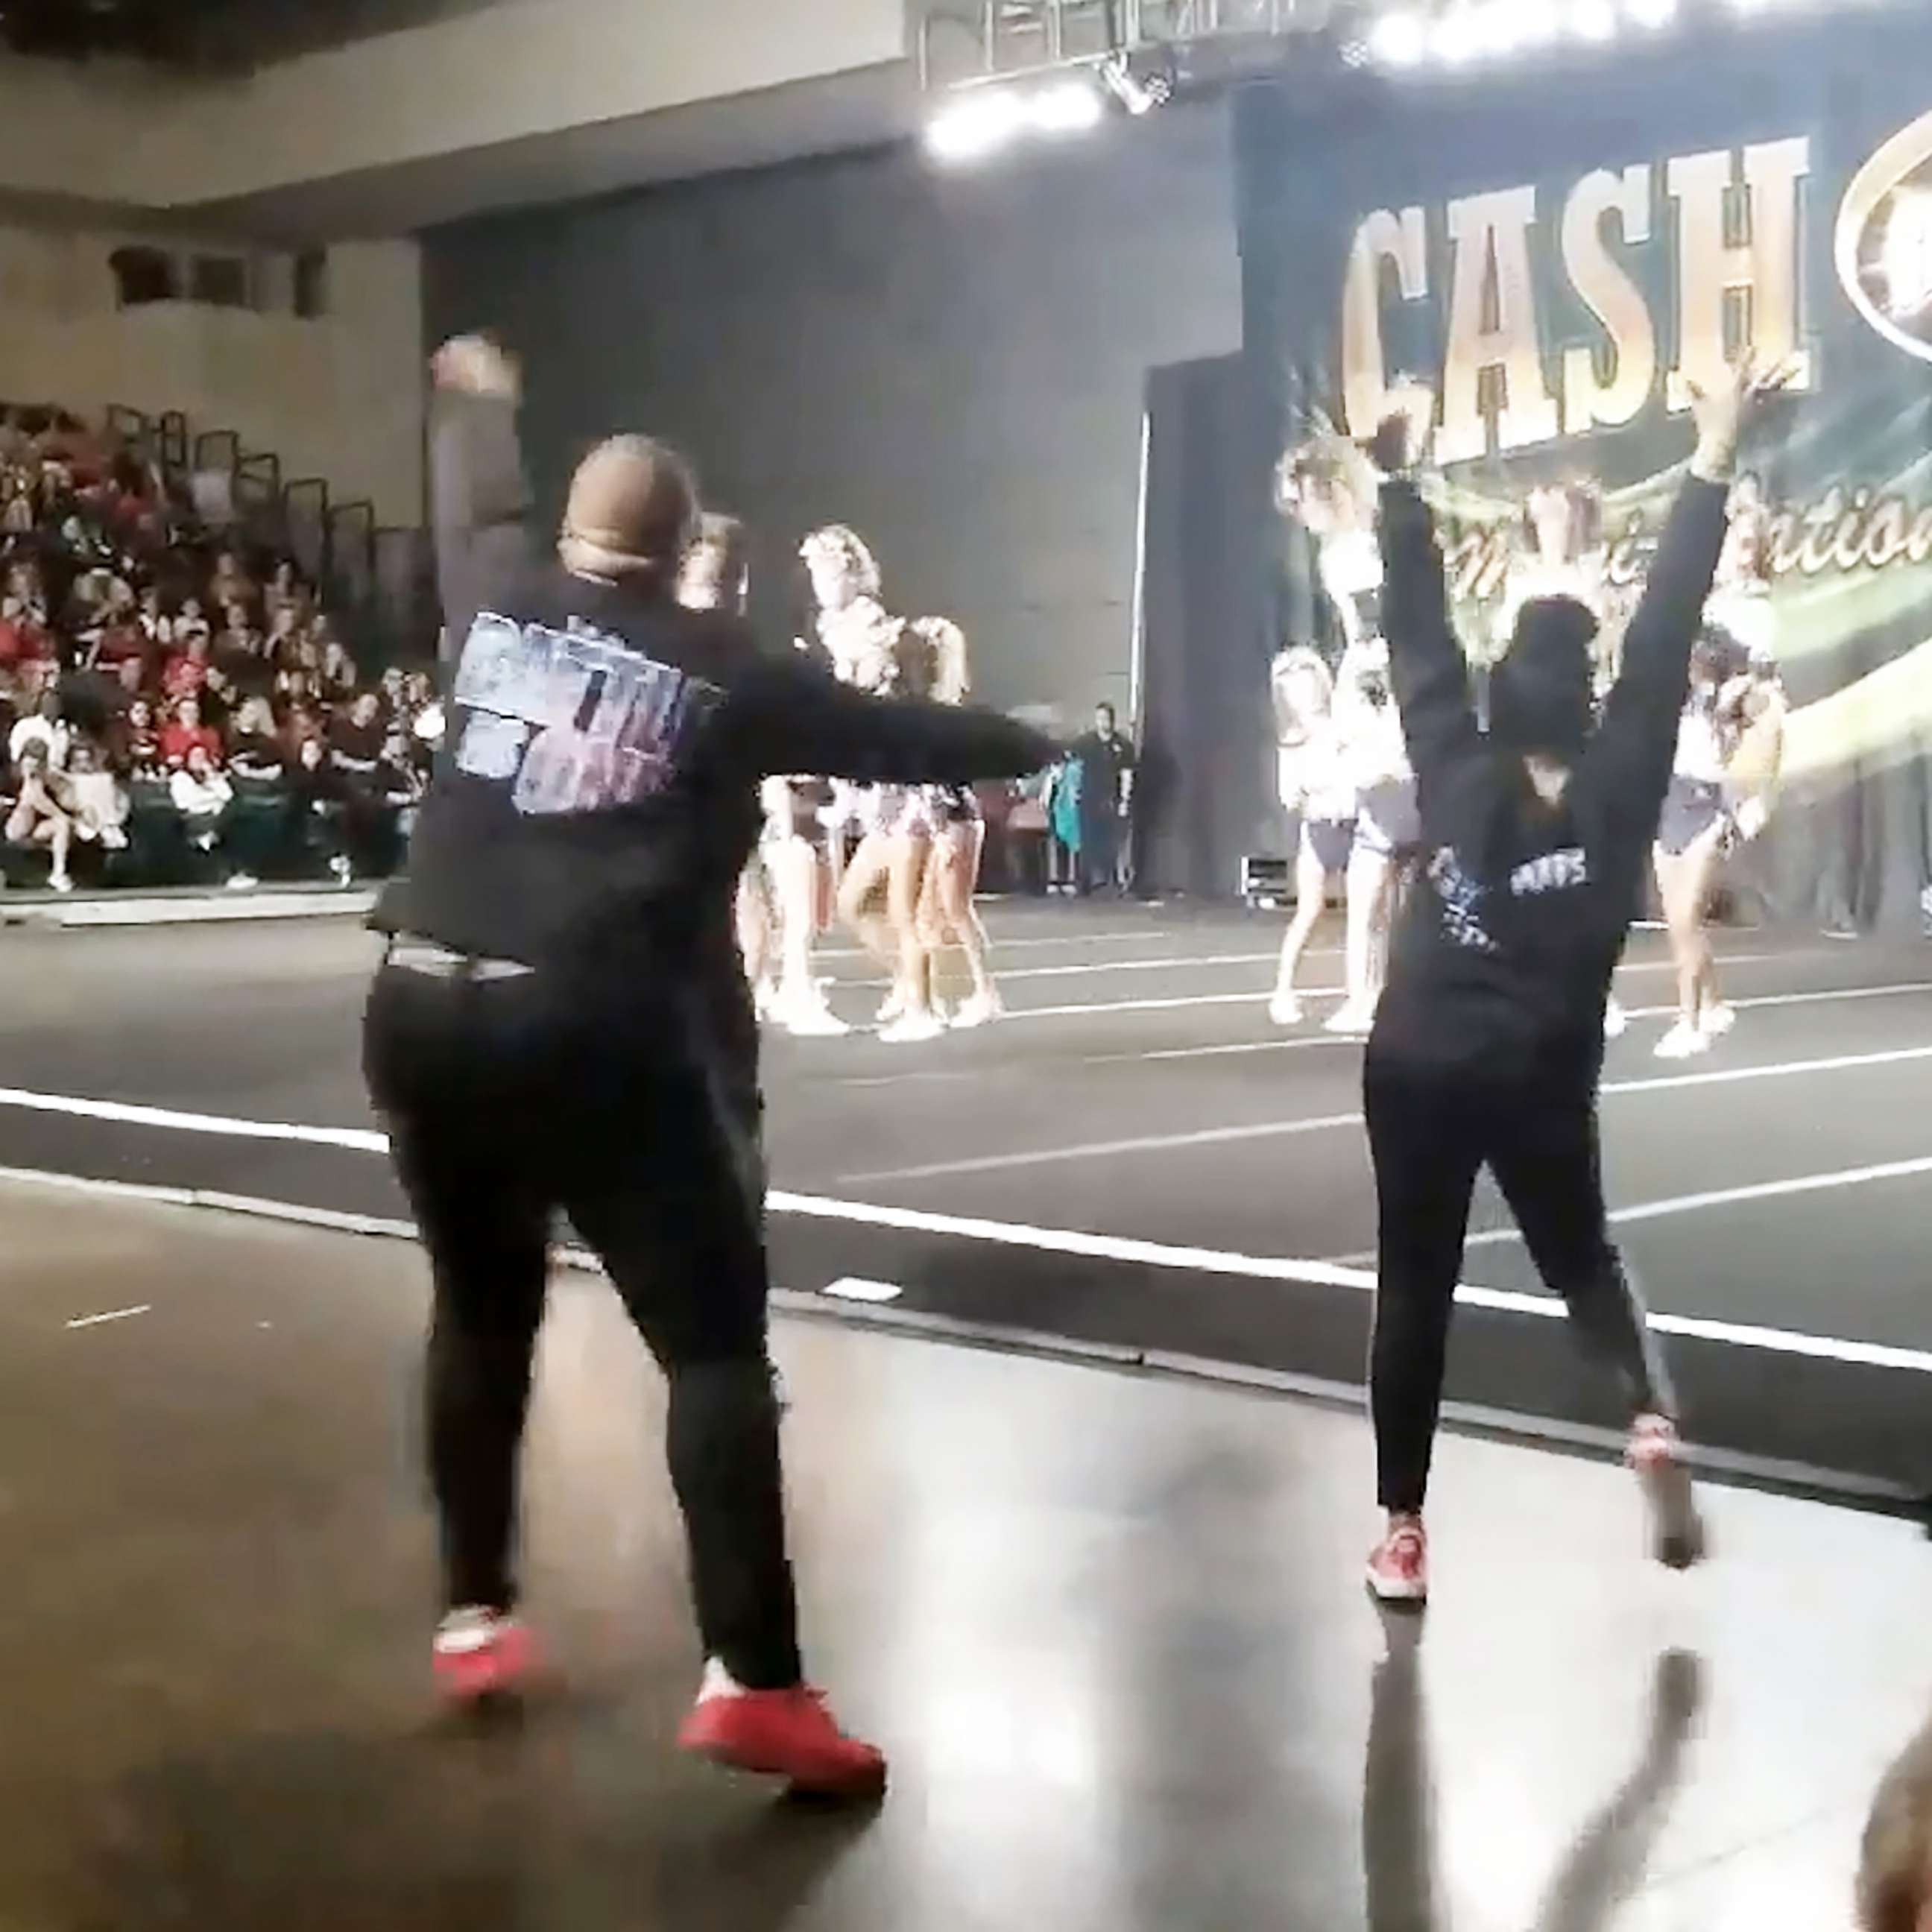 PHOTO: Trey McGhee and Kymberli Browder of All-Star Revolution gym in Texas, were captured on video by a parents while cheering on their team on Jan. 12, at a cheerleading competition.